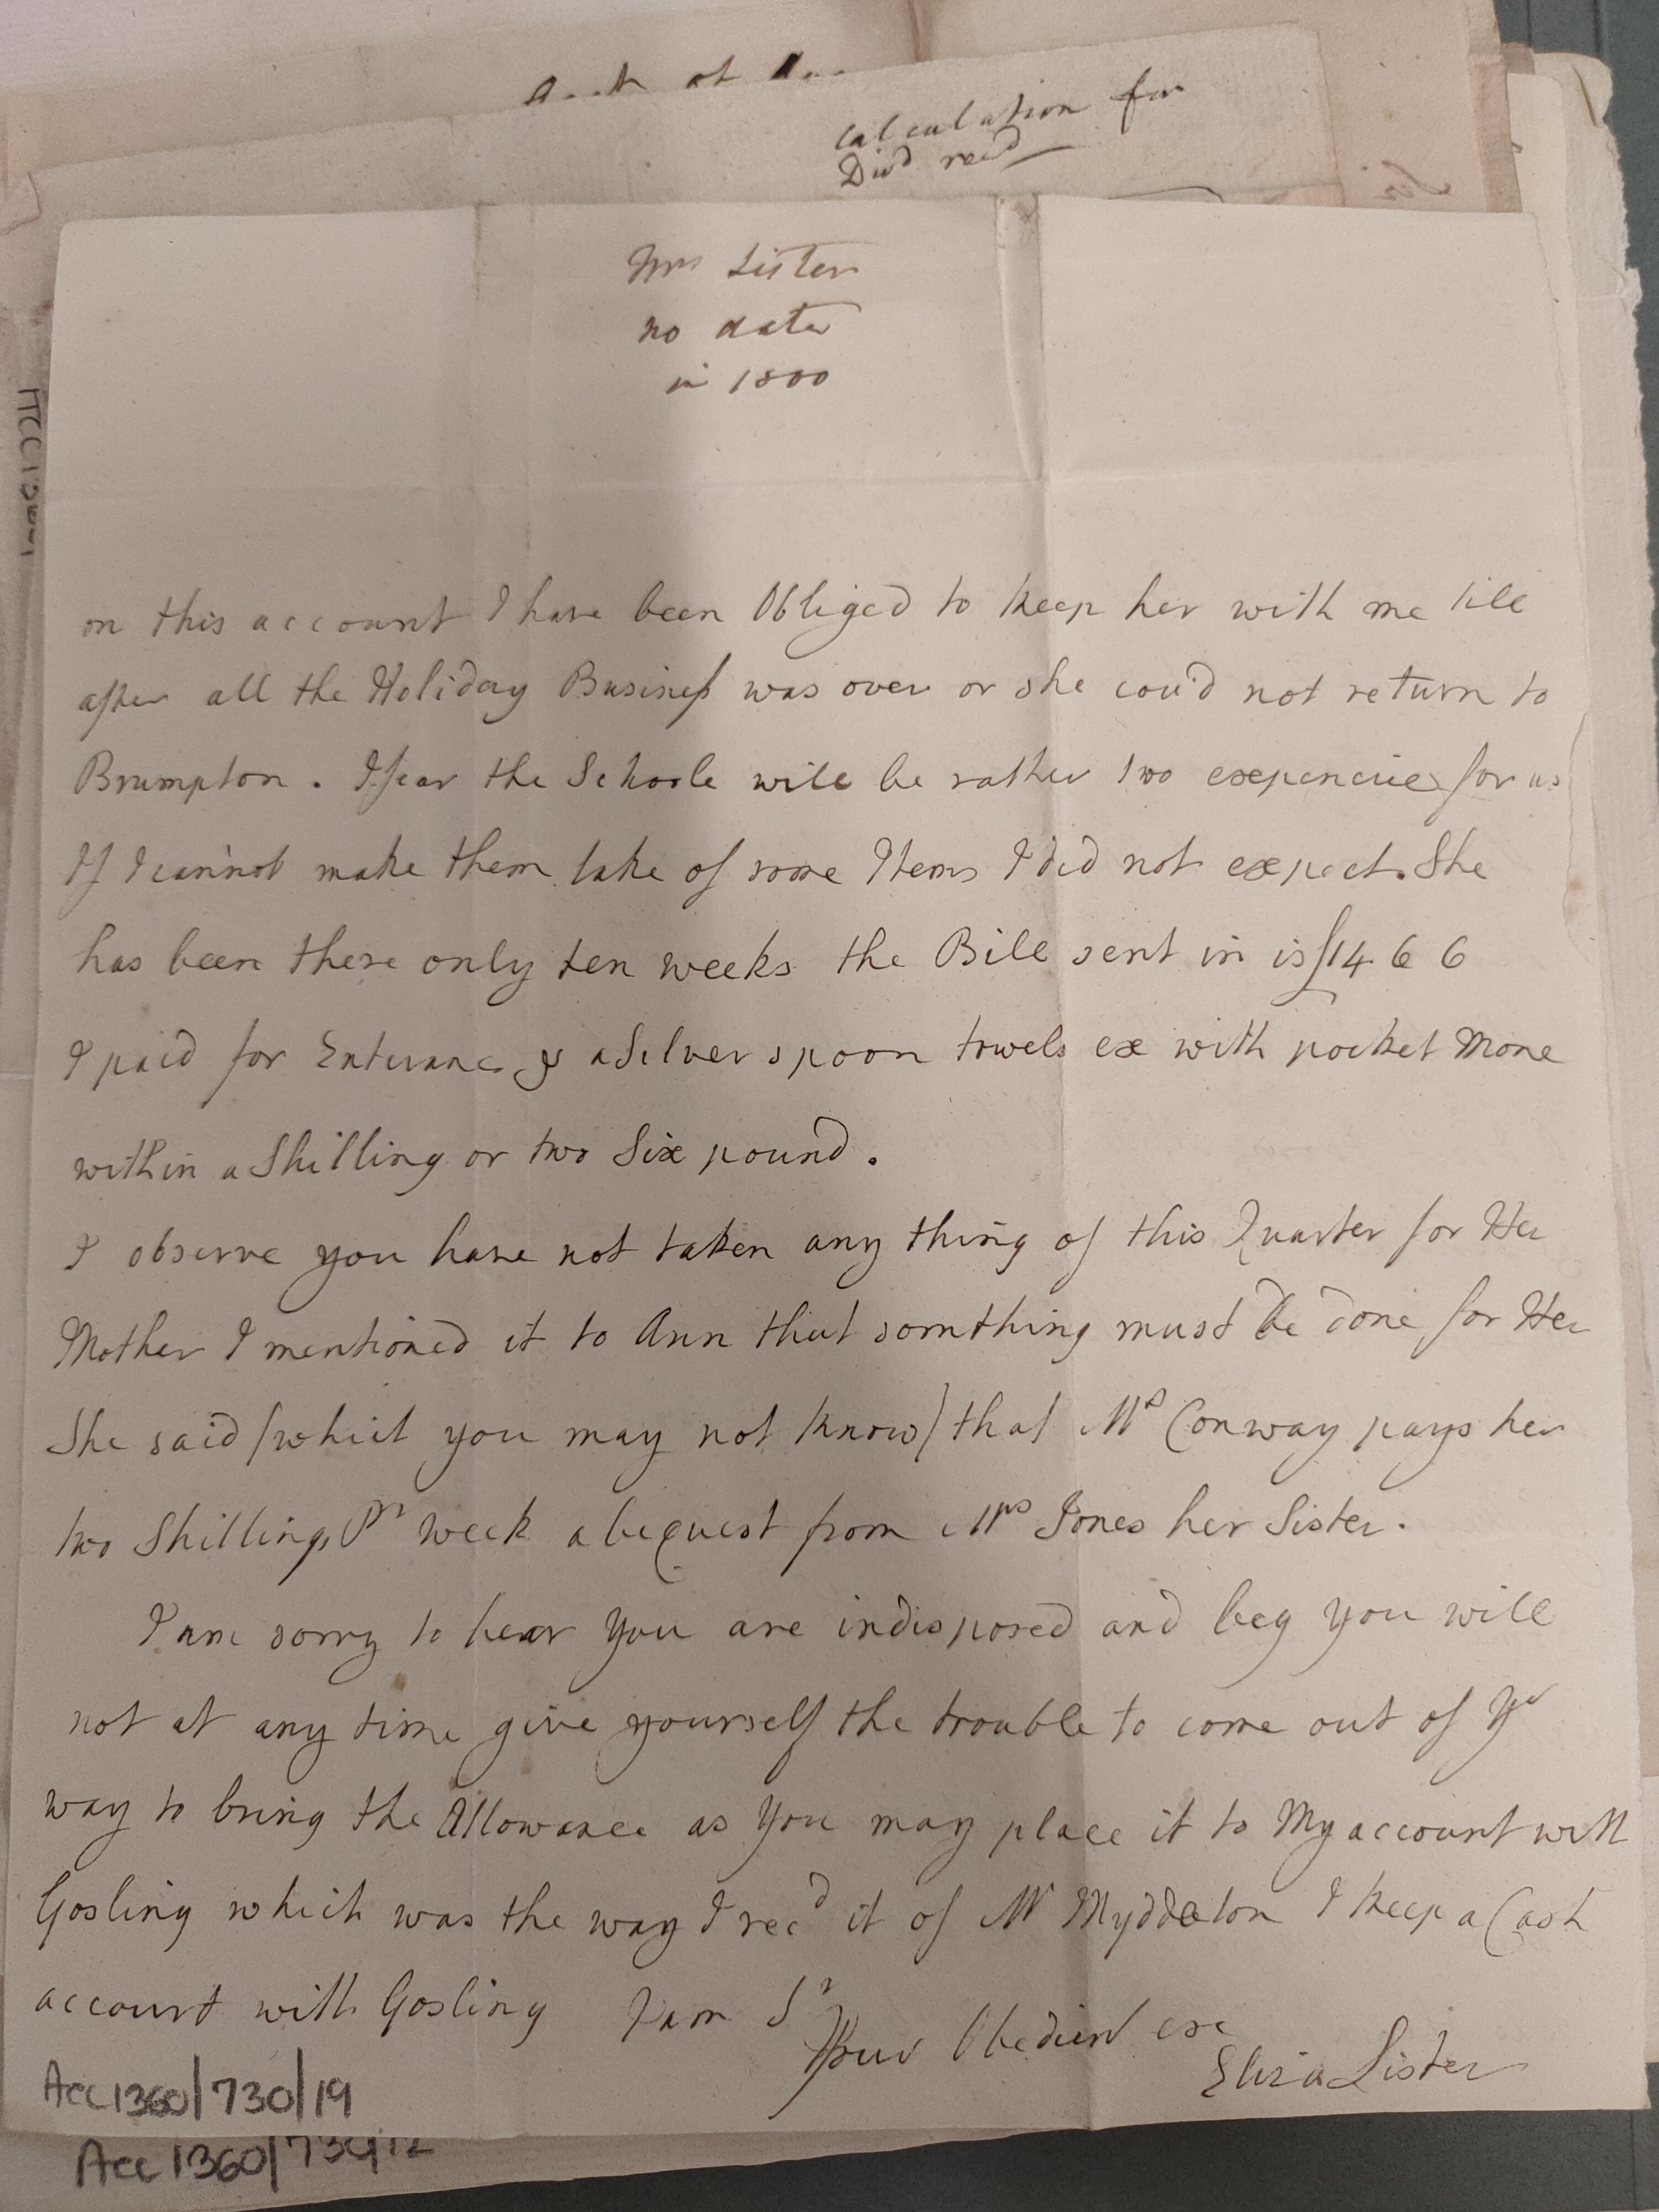 Image #2 of letter: Elizabeth Lister to James Clitherow Esq, Undated, 1800